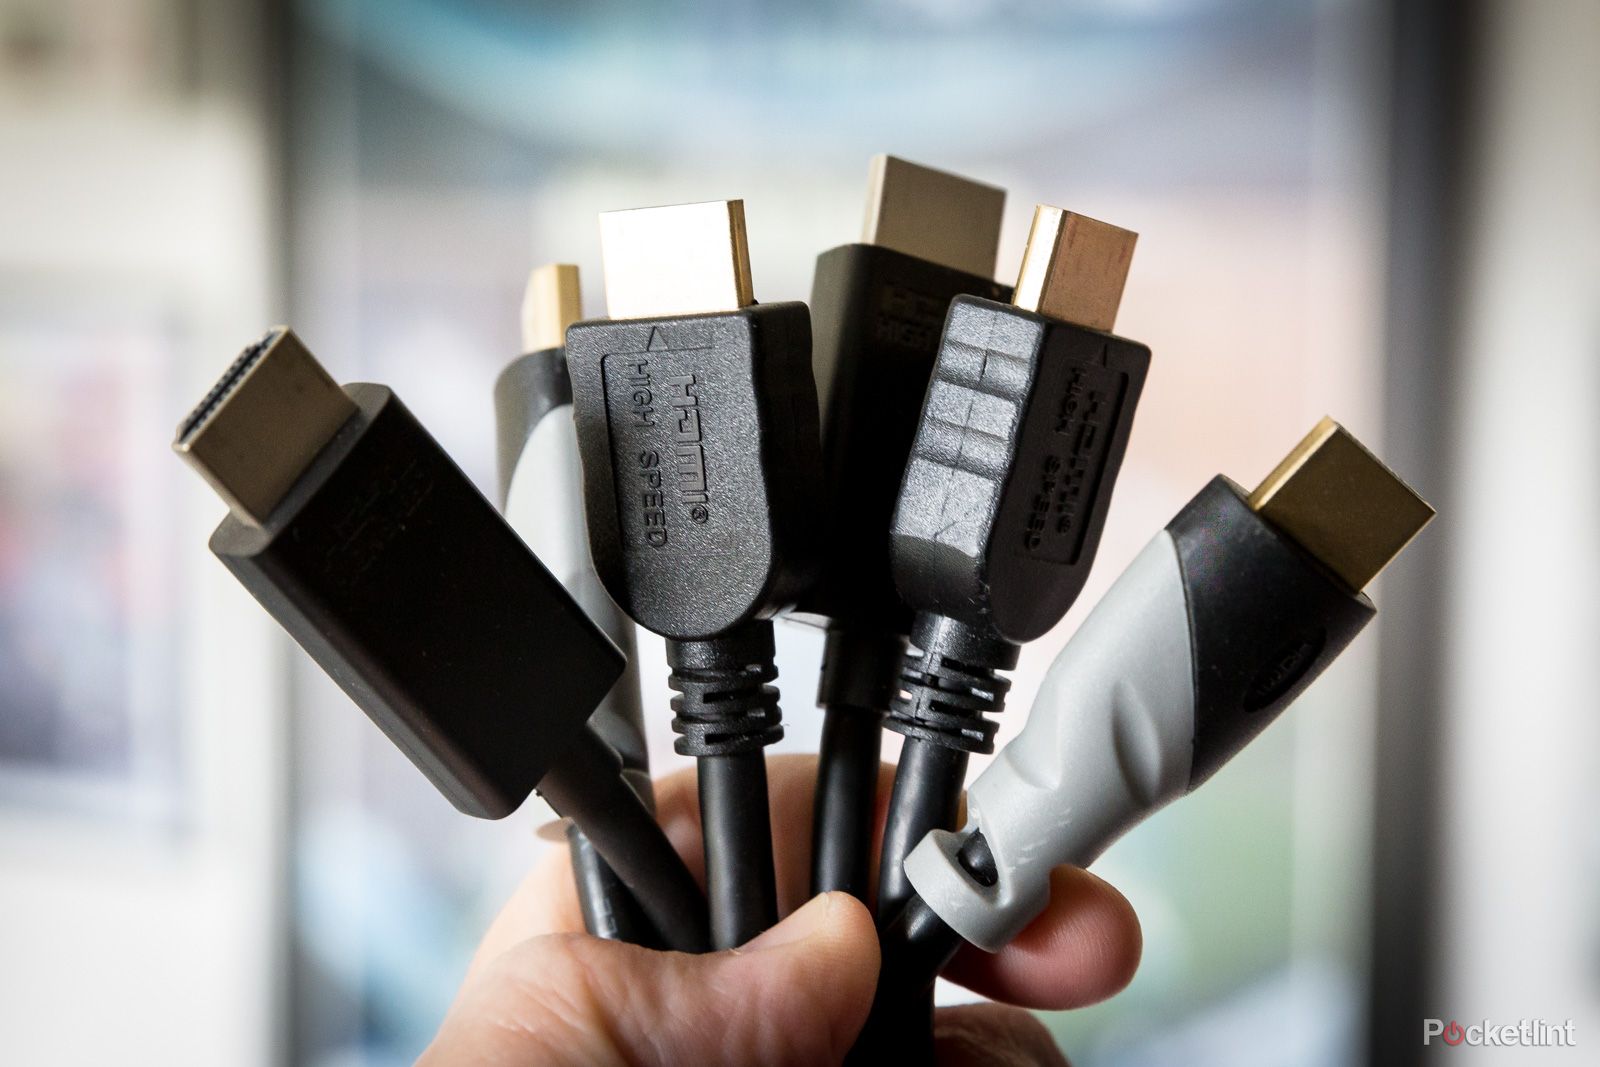 What is HDMI eARC? How it is different from HDMI ARC